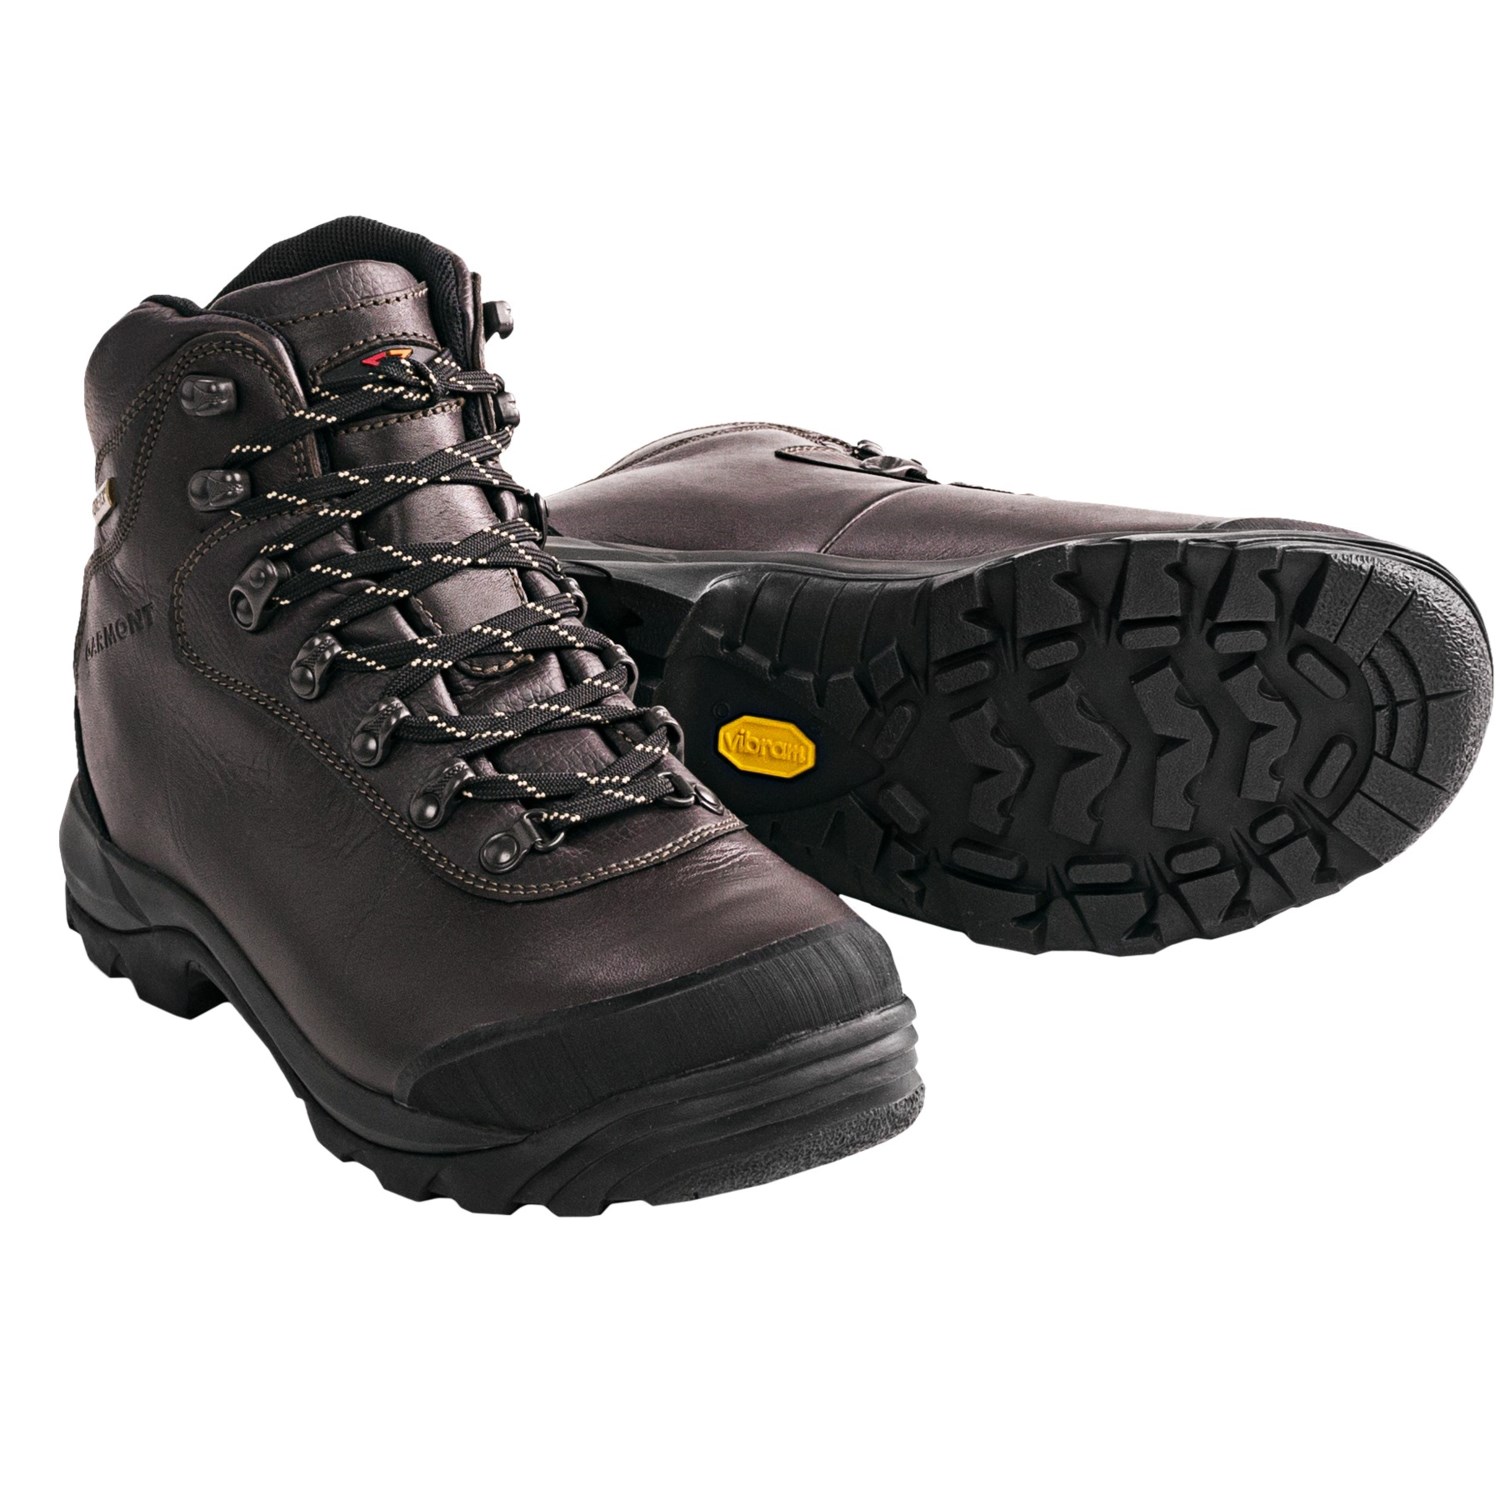 Garmont Syncro II Plus Gore-Tex® Hiking Boots (For Men) - Save 52%